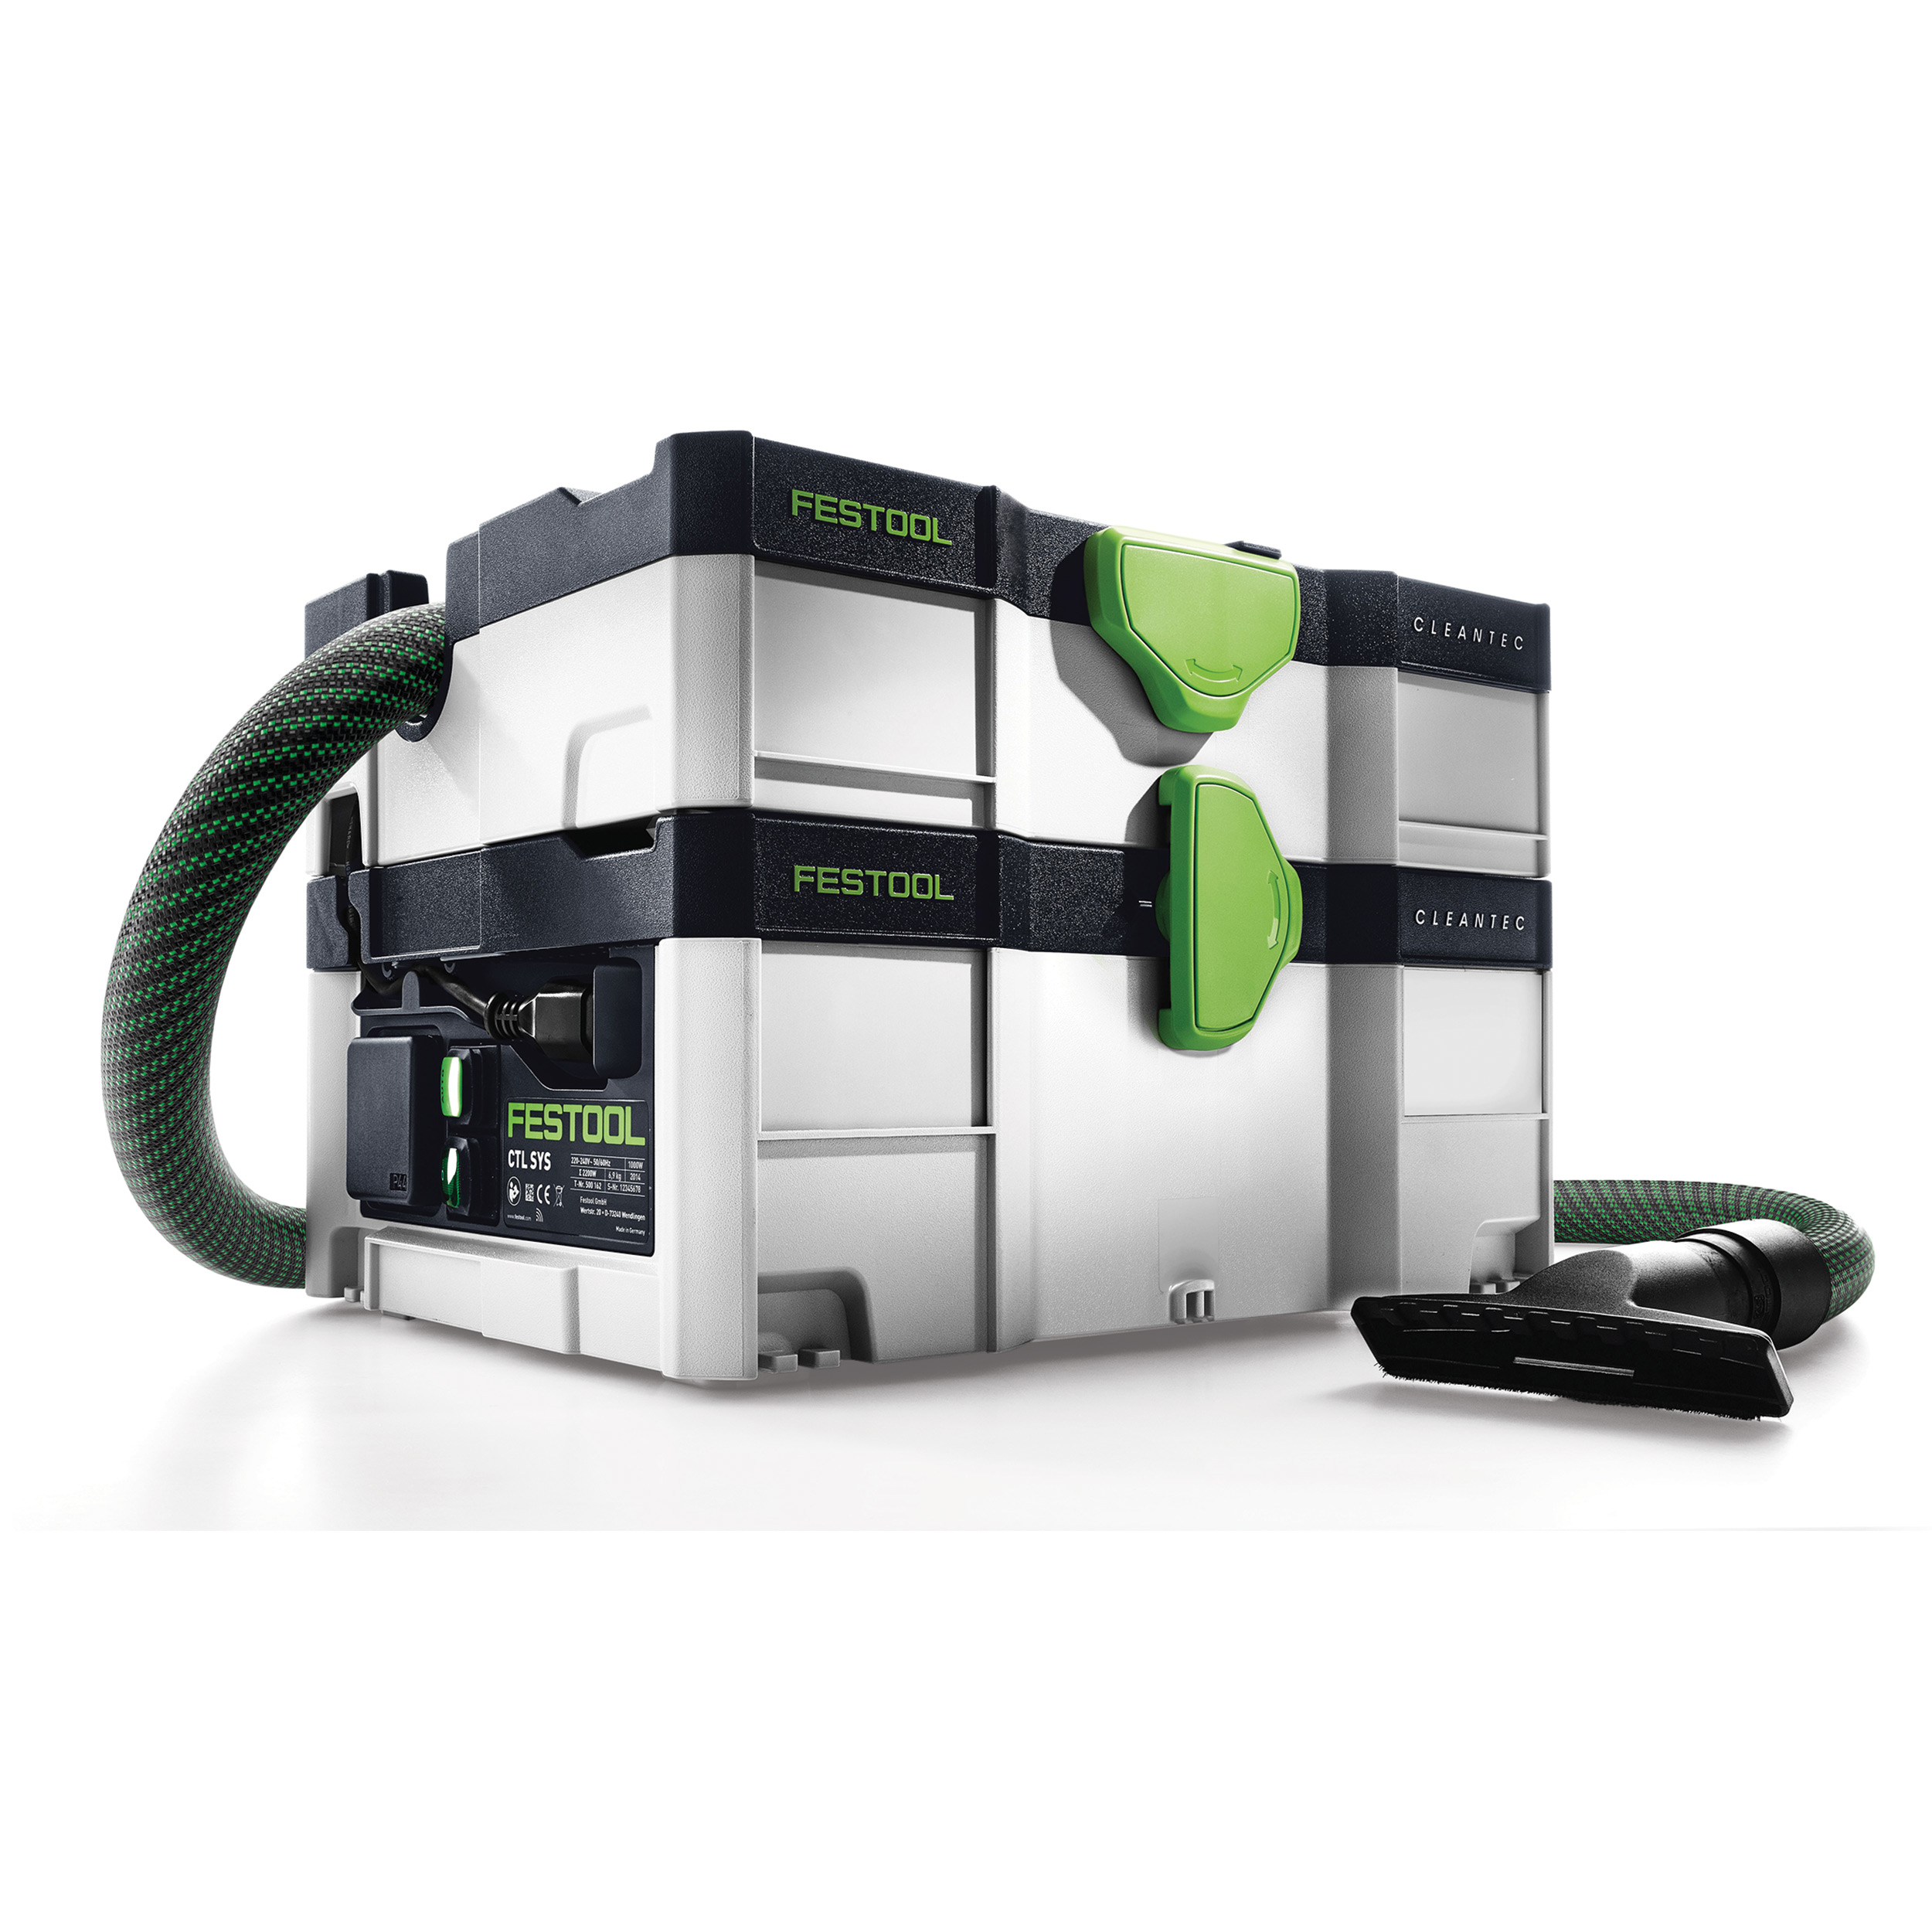 Festool Portable Dust Extractor Ct Sys